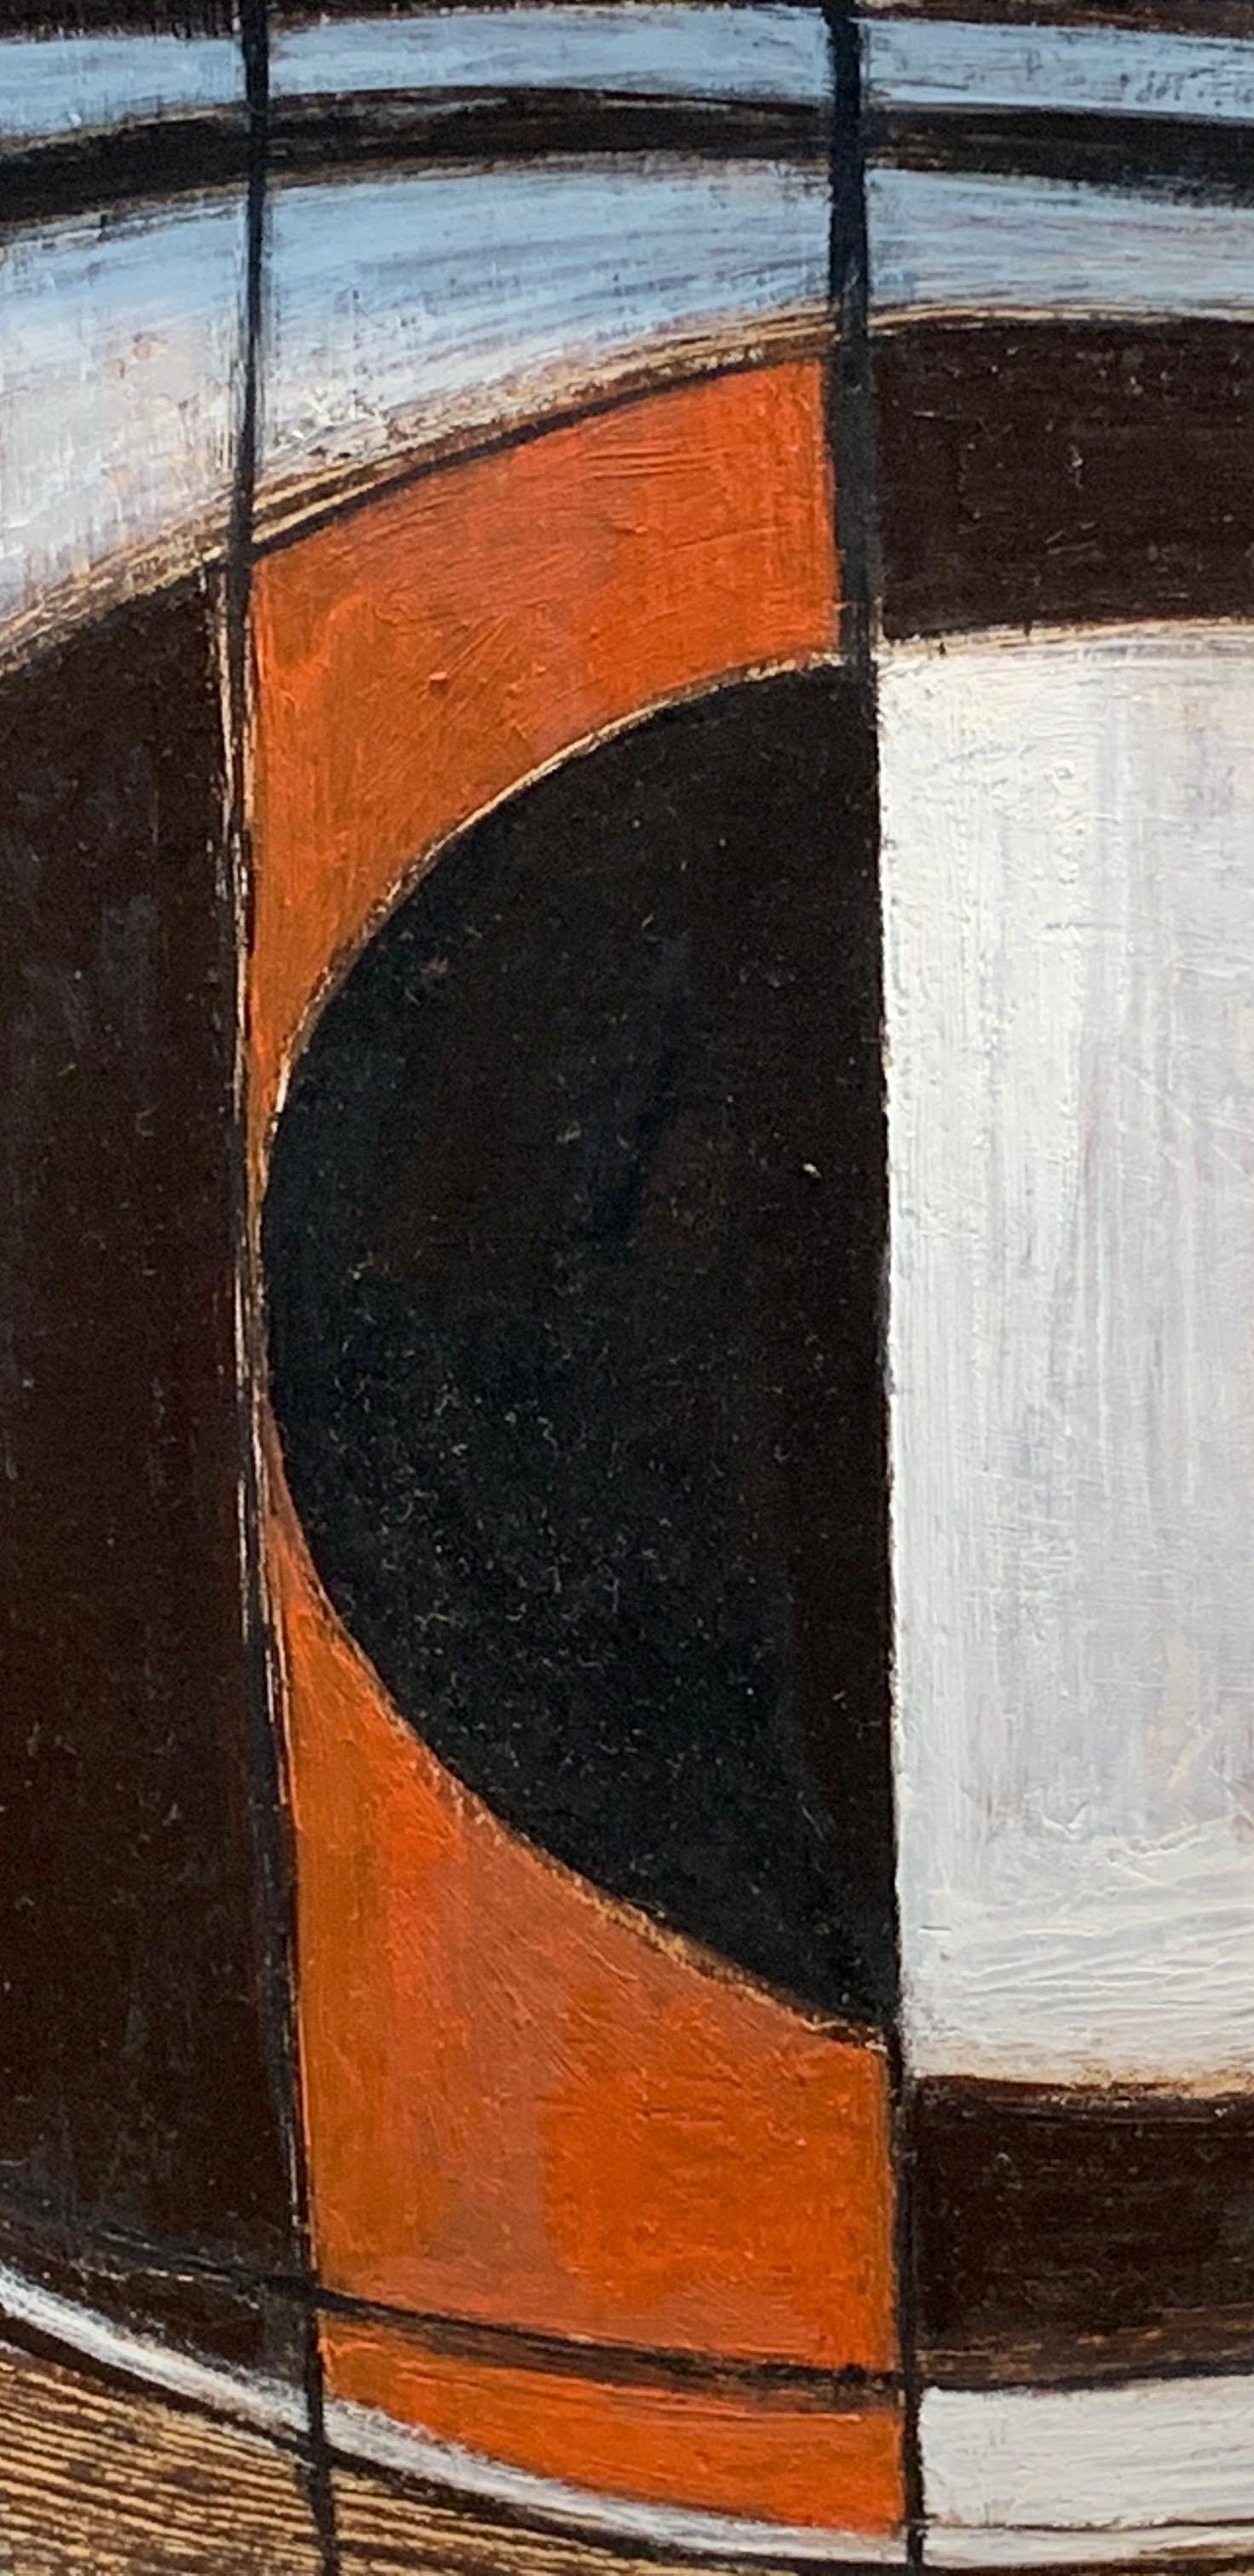 This abstract painting is by Contemporary British artist John Taylor.  
The colors of the acrylic painting are black, white and orange and is framed in a vintage frame. 
The artist was originally trained as a theater and film designer.  He has been